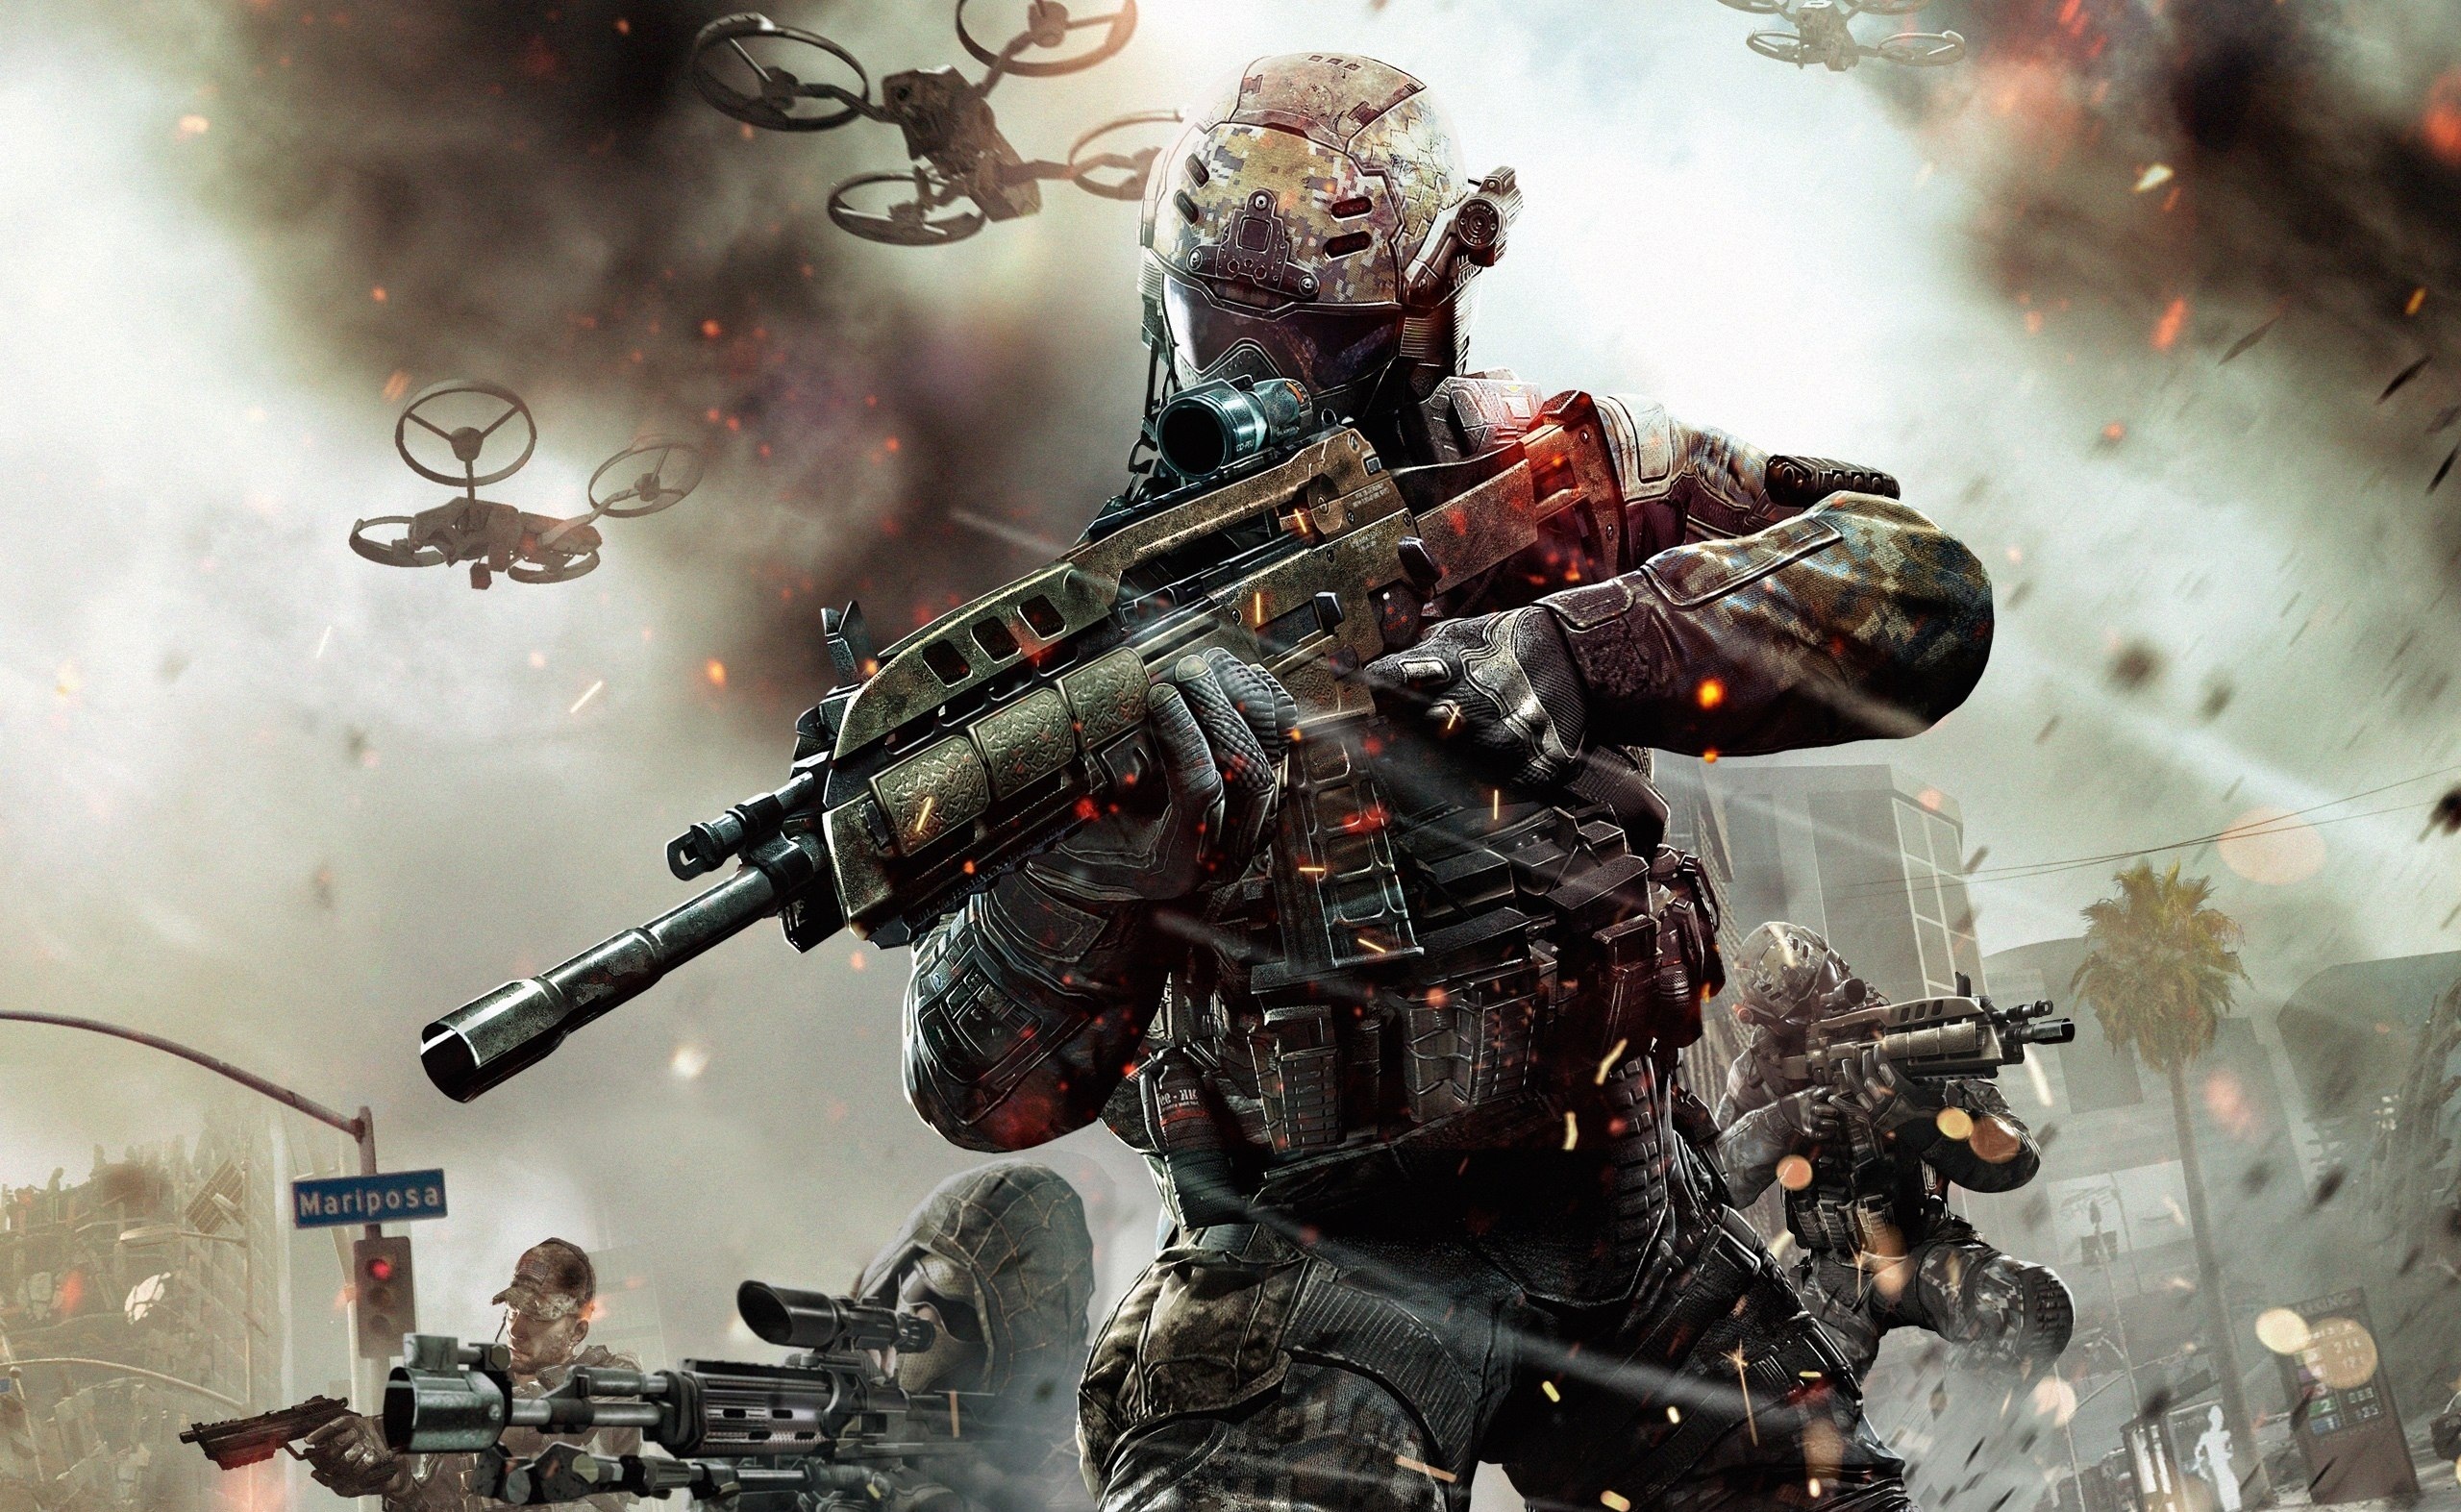 1000+ Call of Duty HD Wallpapers and Backgrounds